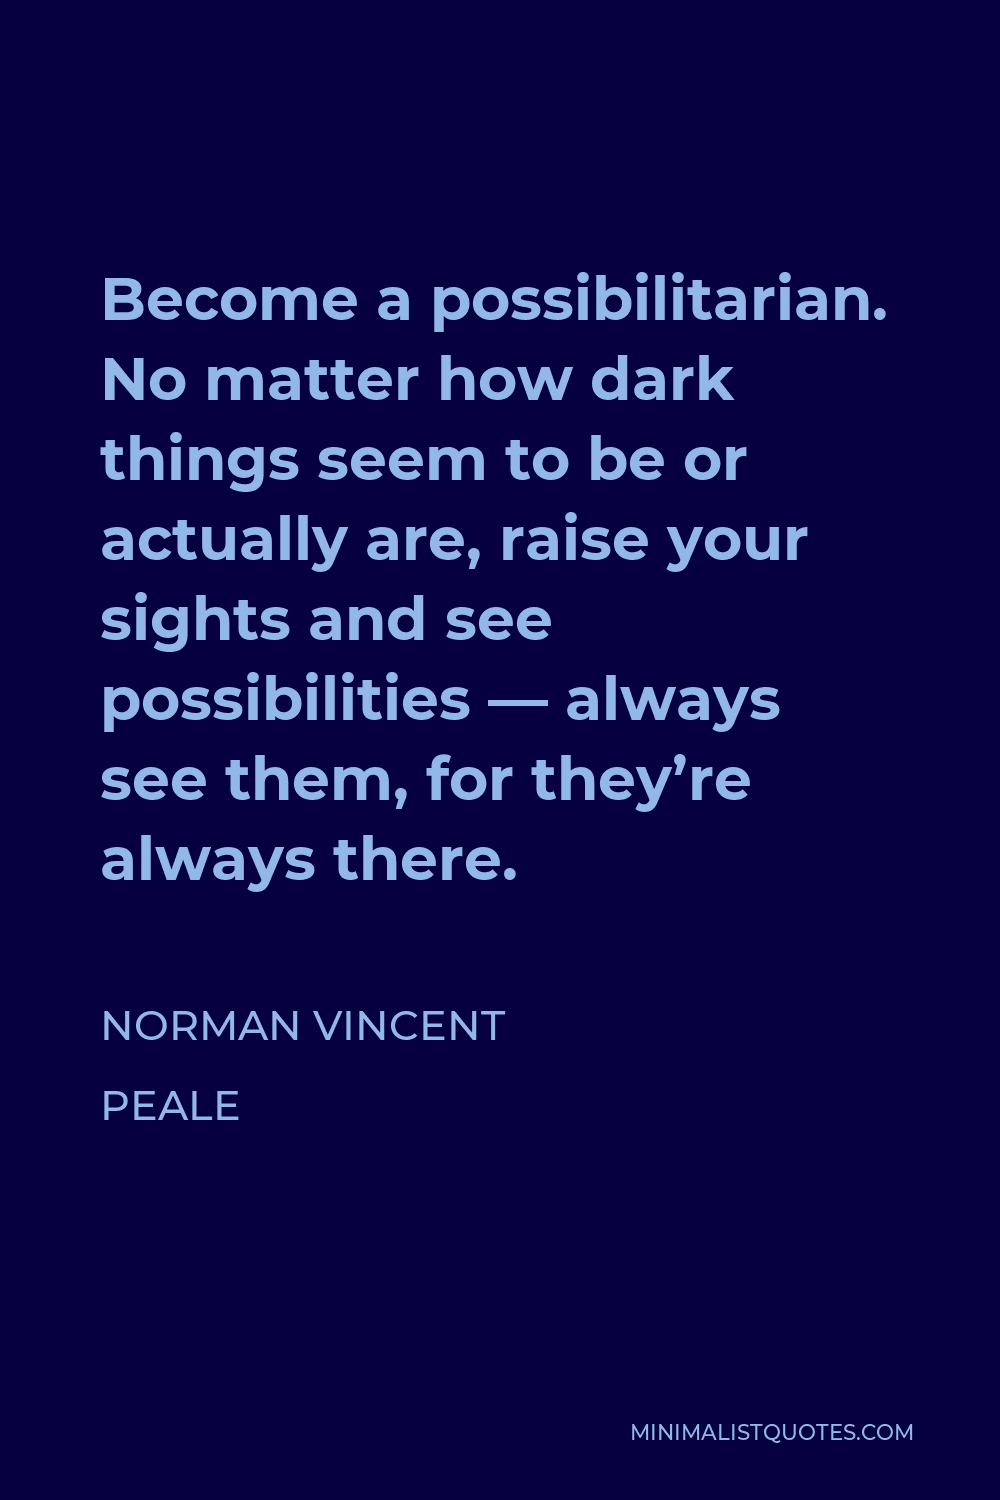 Norman Vincent Peale Quote - Become a possibilitarian. No matter how dark things seem to be or actually are, raise your sights and see possibilities — always see them, for they’re always there.